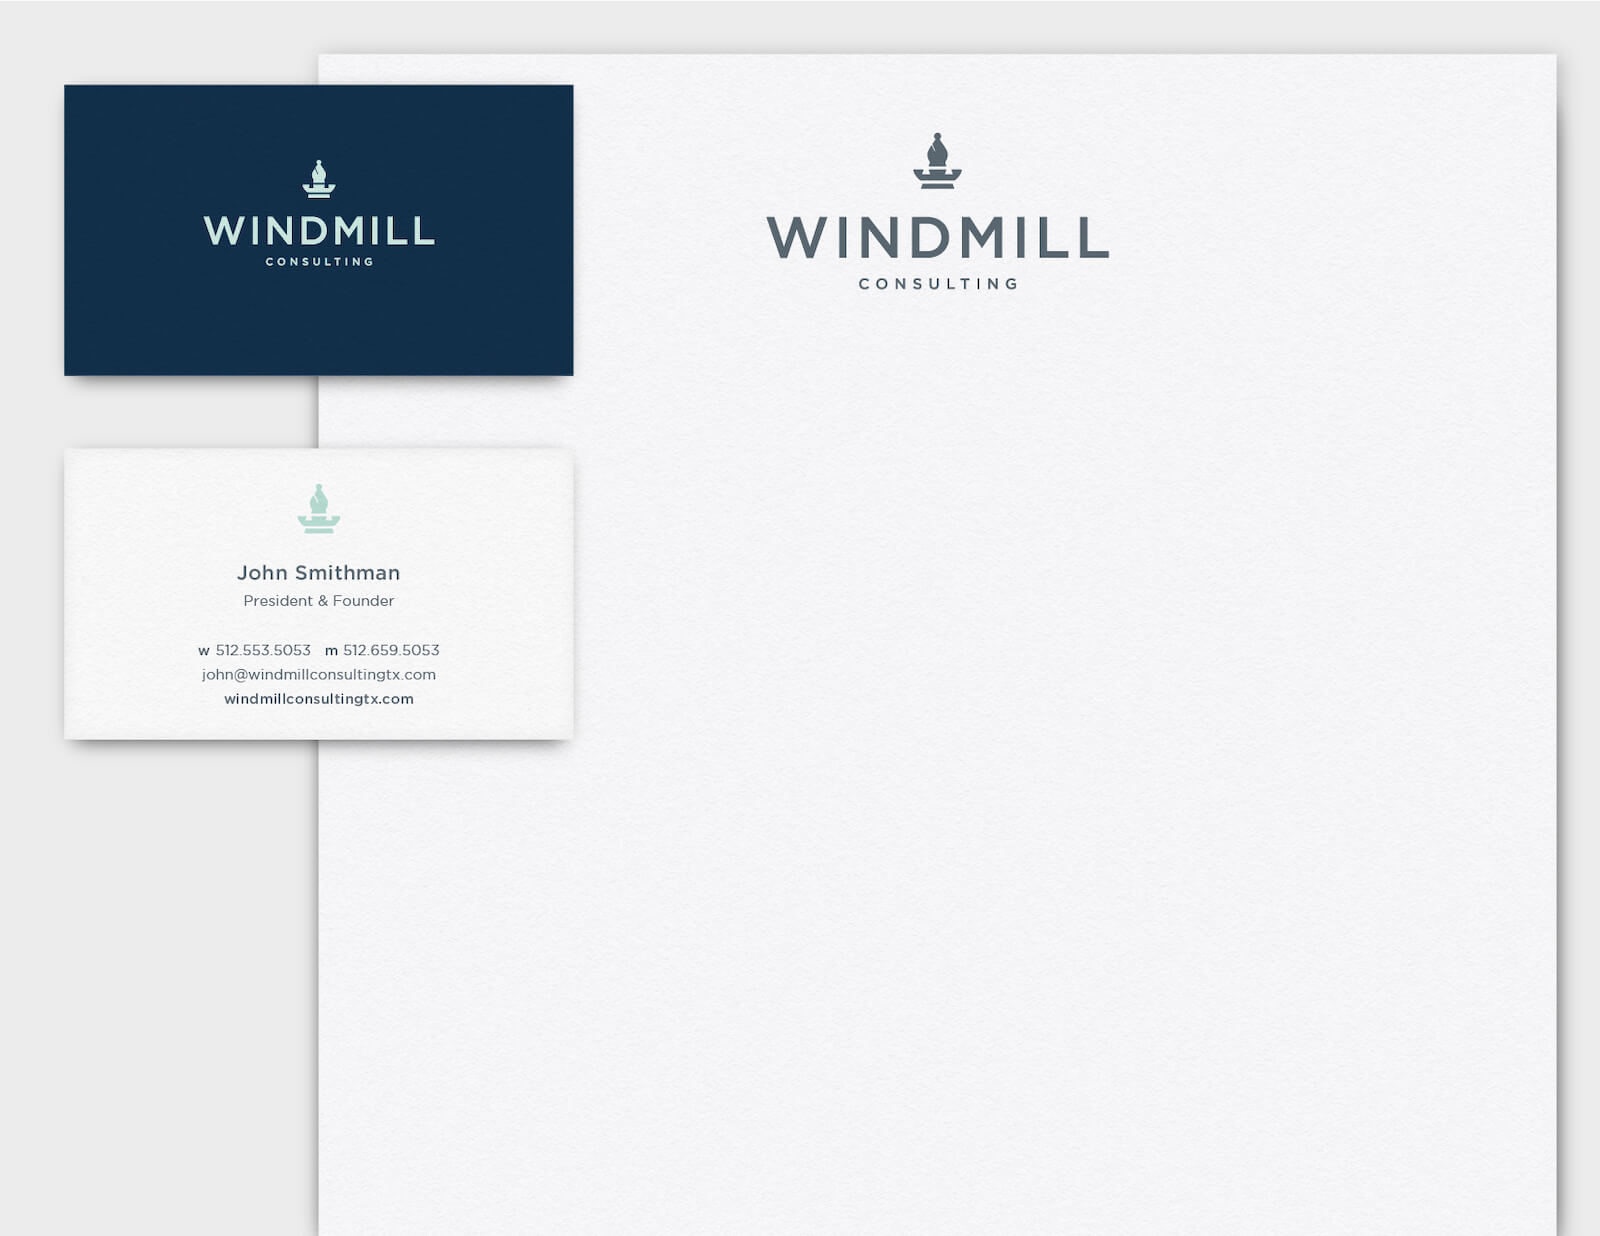 Windmill Consulting Stationery Design